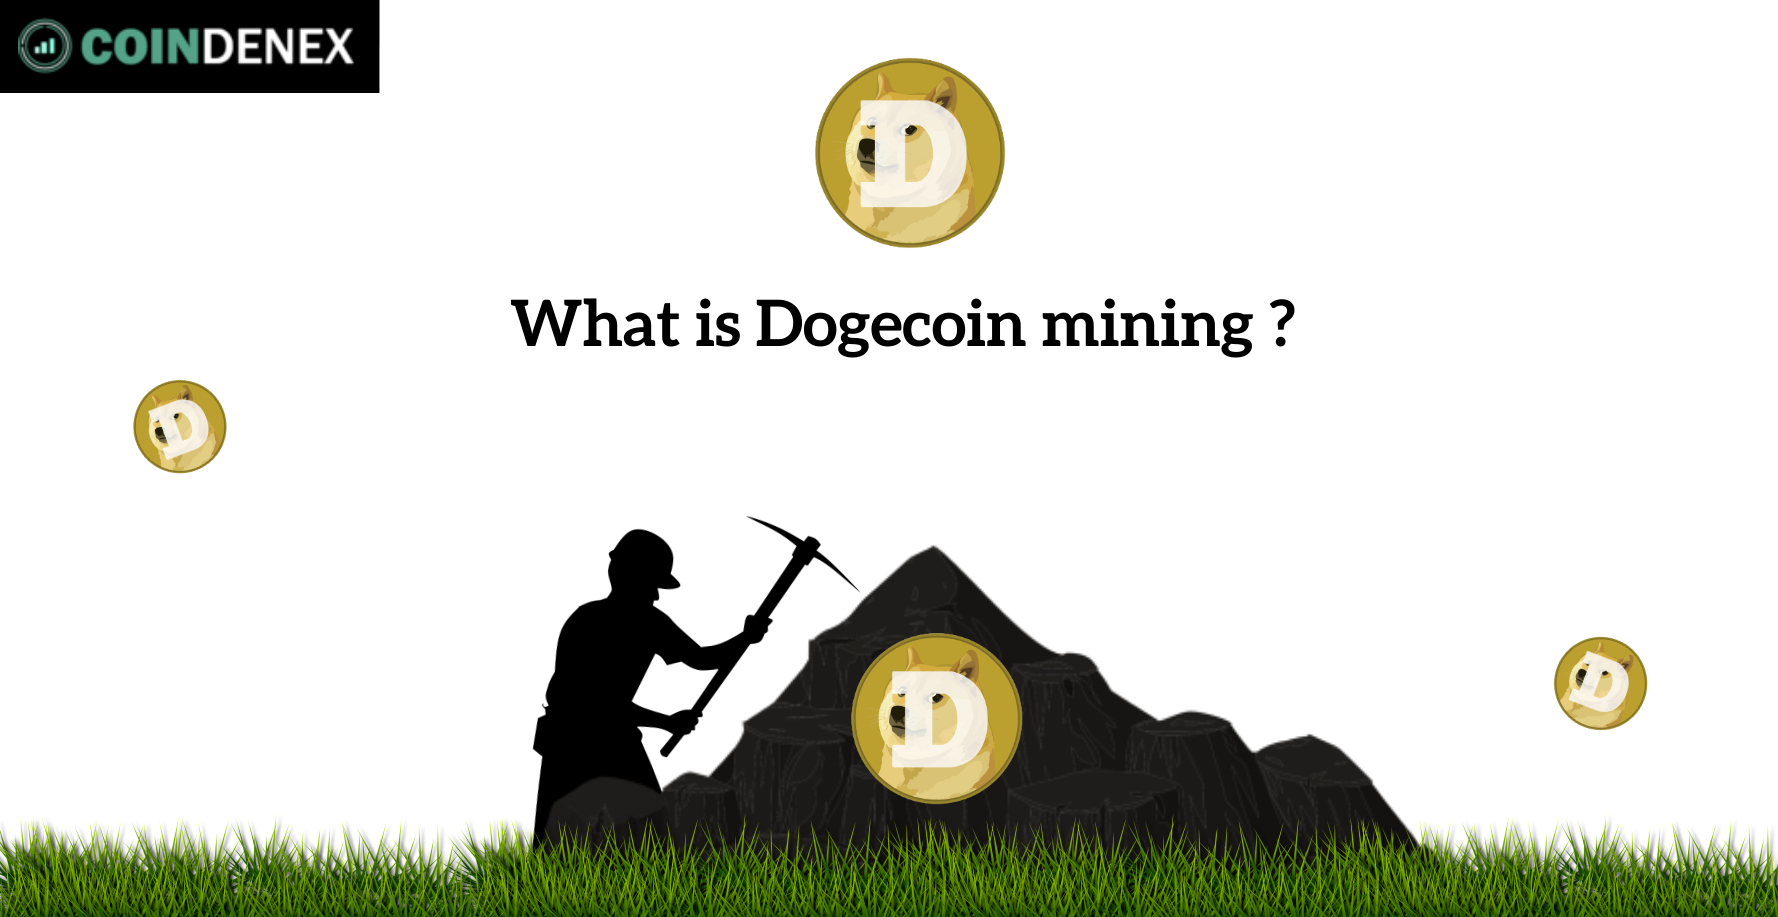 Dogecoin mining is legal